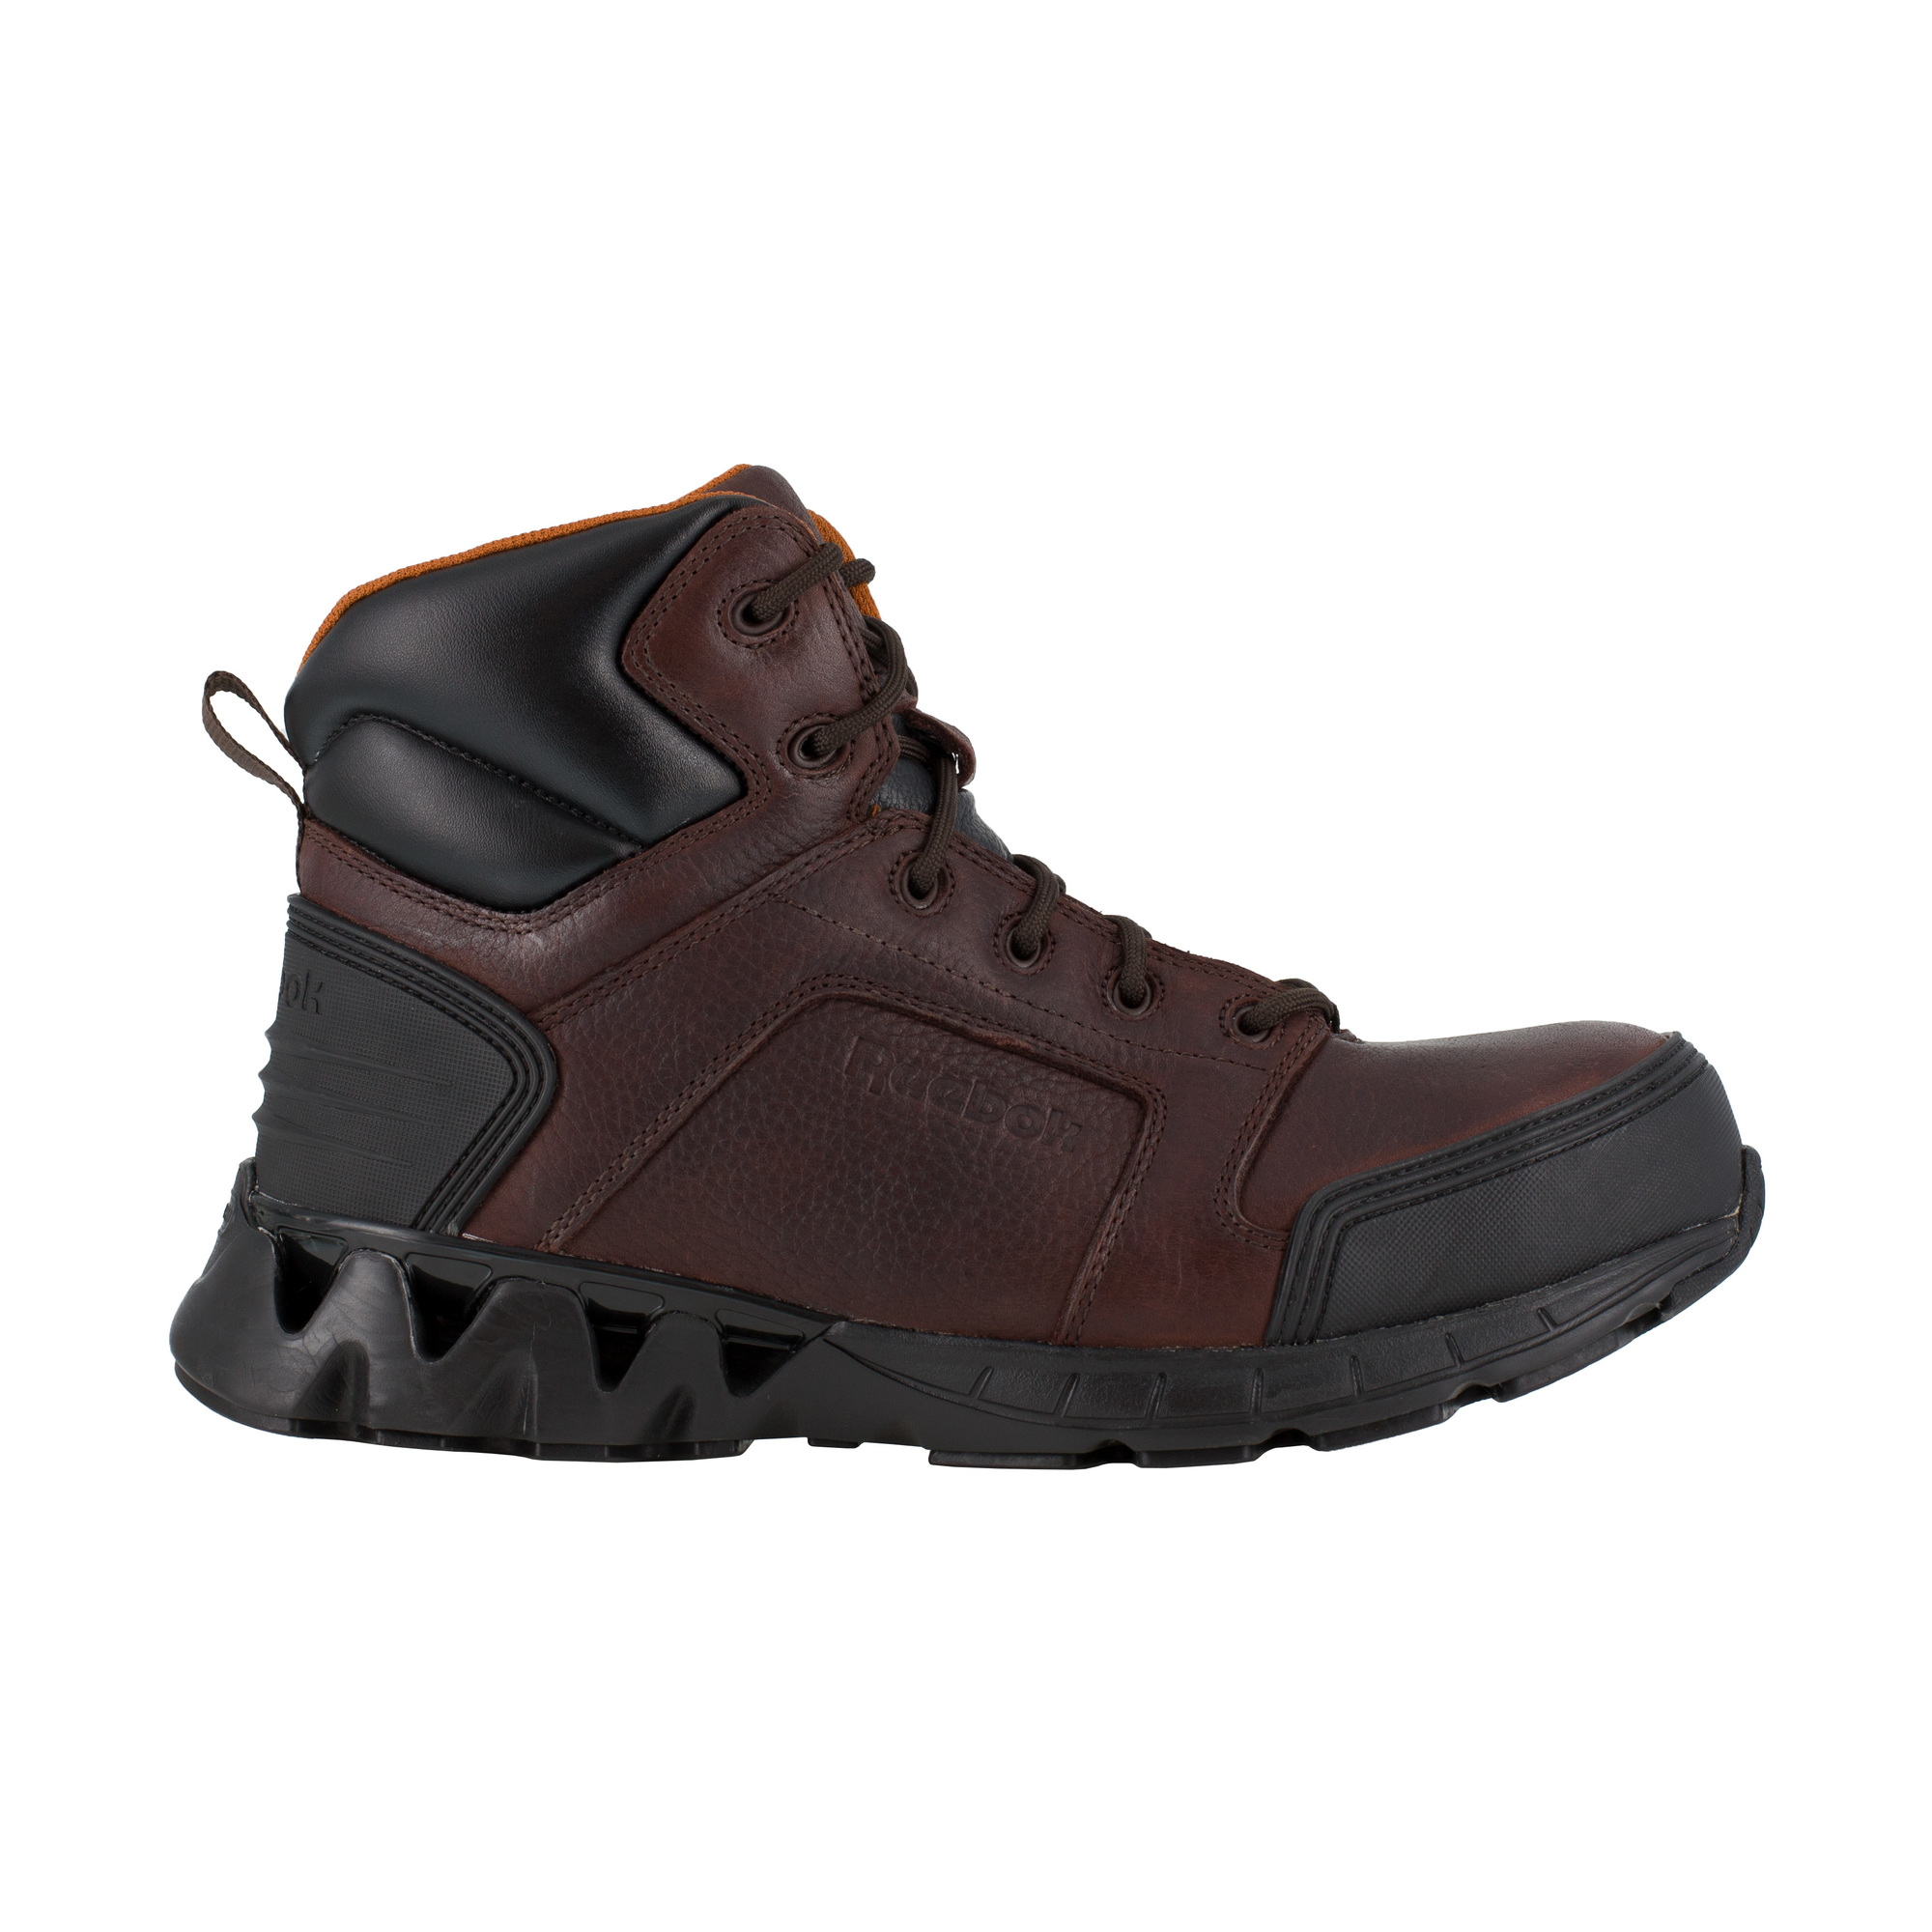 Reebok, 6Inch Athletic Work Boot, Size 14, Width Wide, Color Dark Brown, Model RB7005 -  RB7005-W-14.0